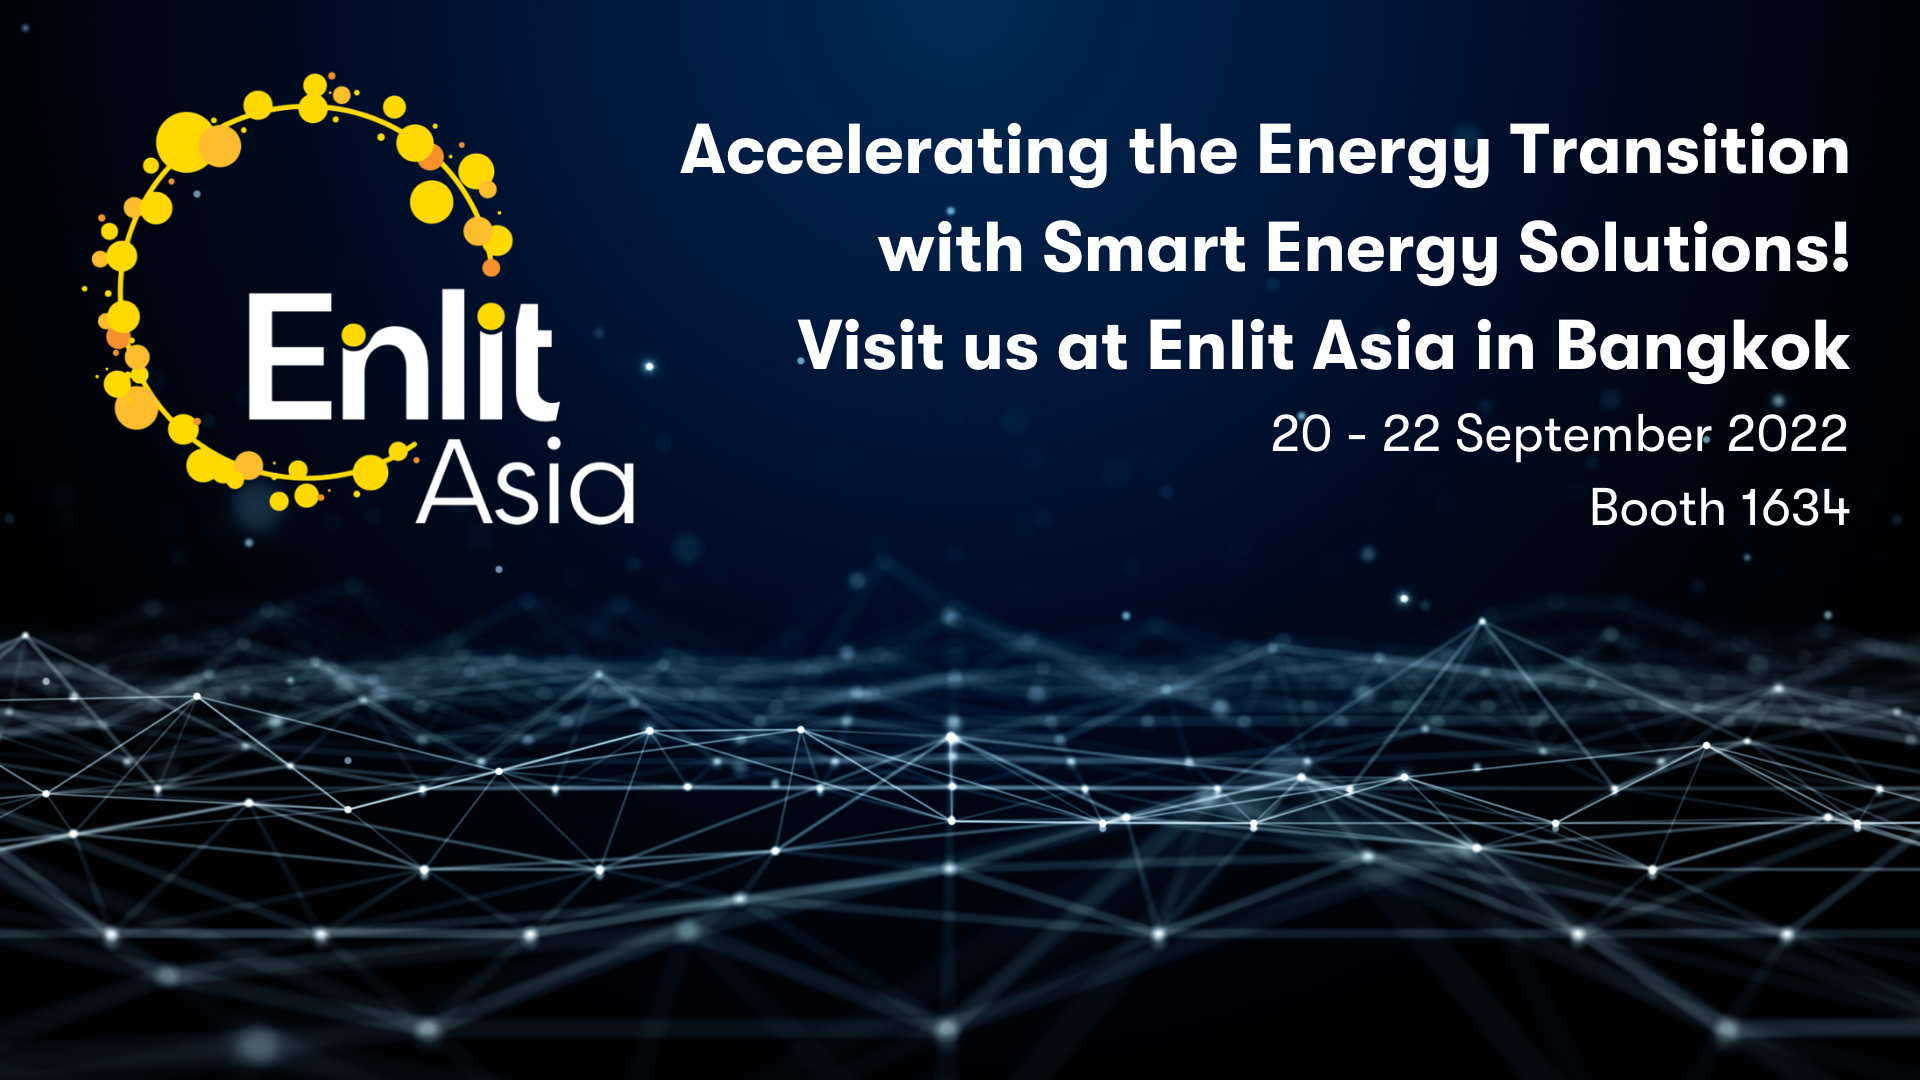 uploads/pics/https://energies.iqony.energy/uploads/pics/Accelerating_the_Energy_Transition_with_Smart_Digital_Solutions_Visit_us_at_Enlit_Asia_in_Bangkok__1__17.png